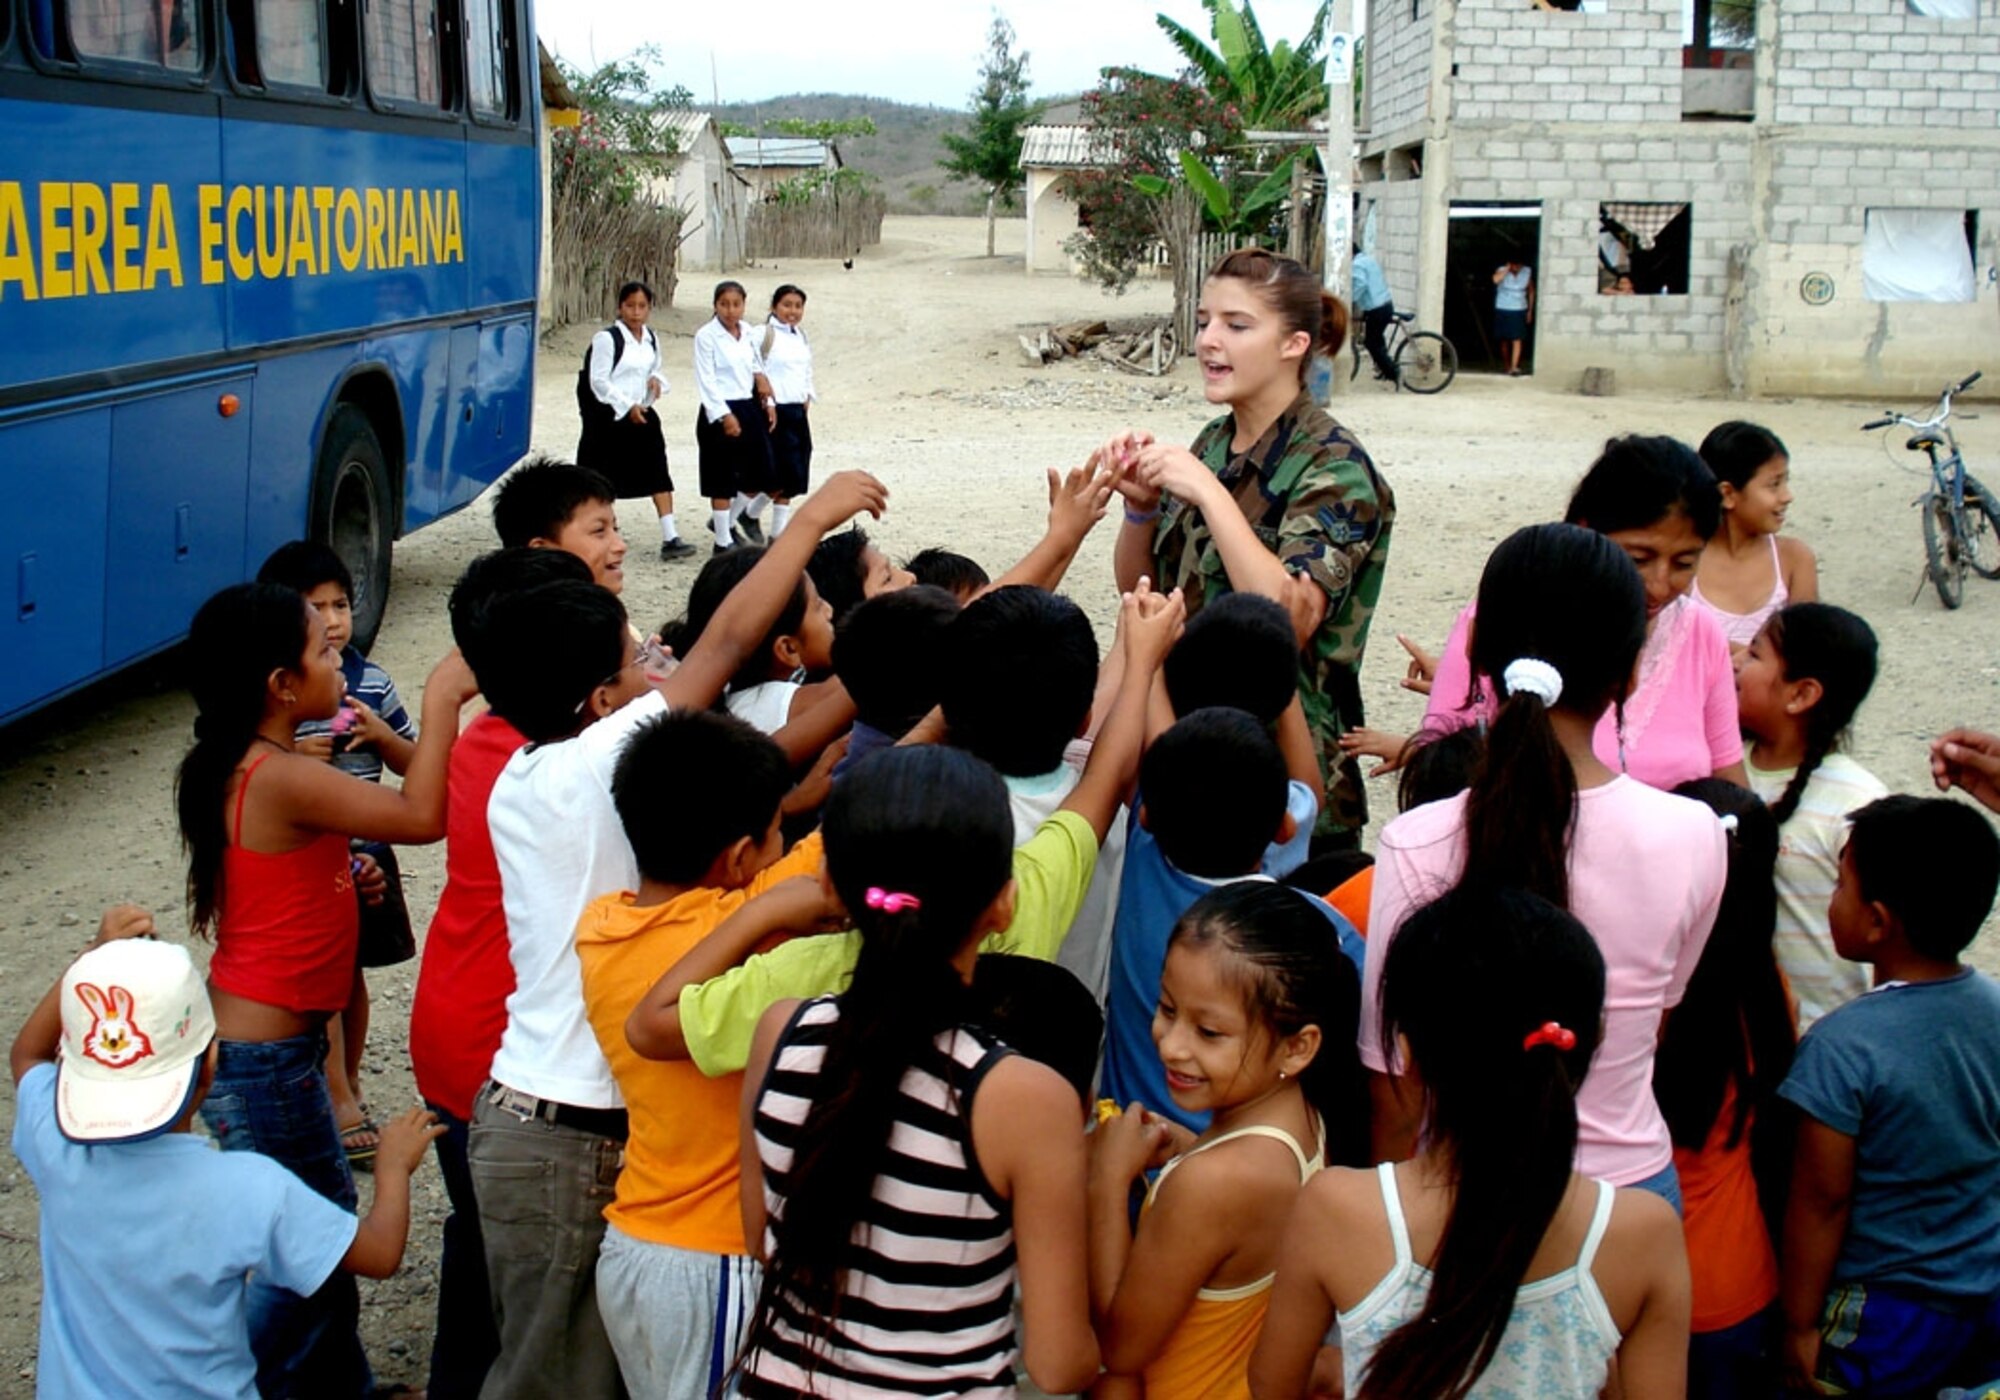 Airman 1st Class Ashley Couturier, 49th Aeromedical Dental Squadron, hands candy out to local children while deployed to Ecuador. Fourteen Airman traveled there for two week on this humanitarian assistance deployment and treated more than 6,800 patients and filled more than 17,500 prescriptions. (U.S. Air Force photo/courtesy of the 49th Medical Group MEDRETE team)